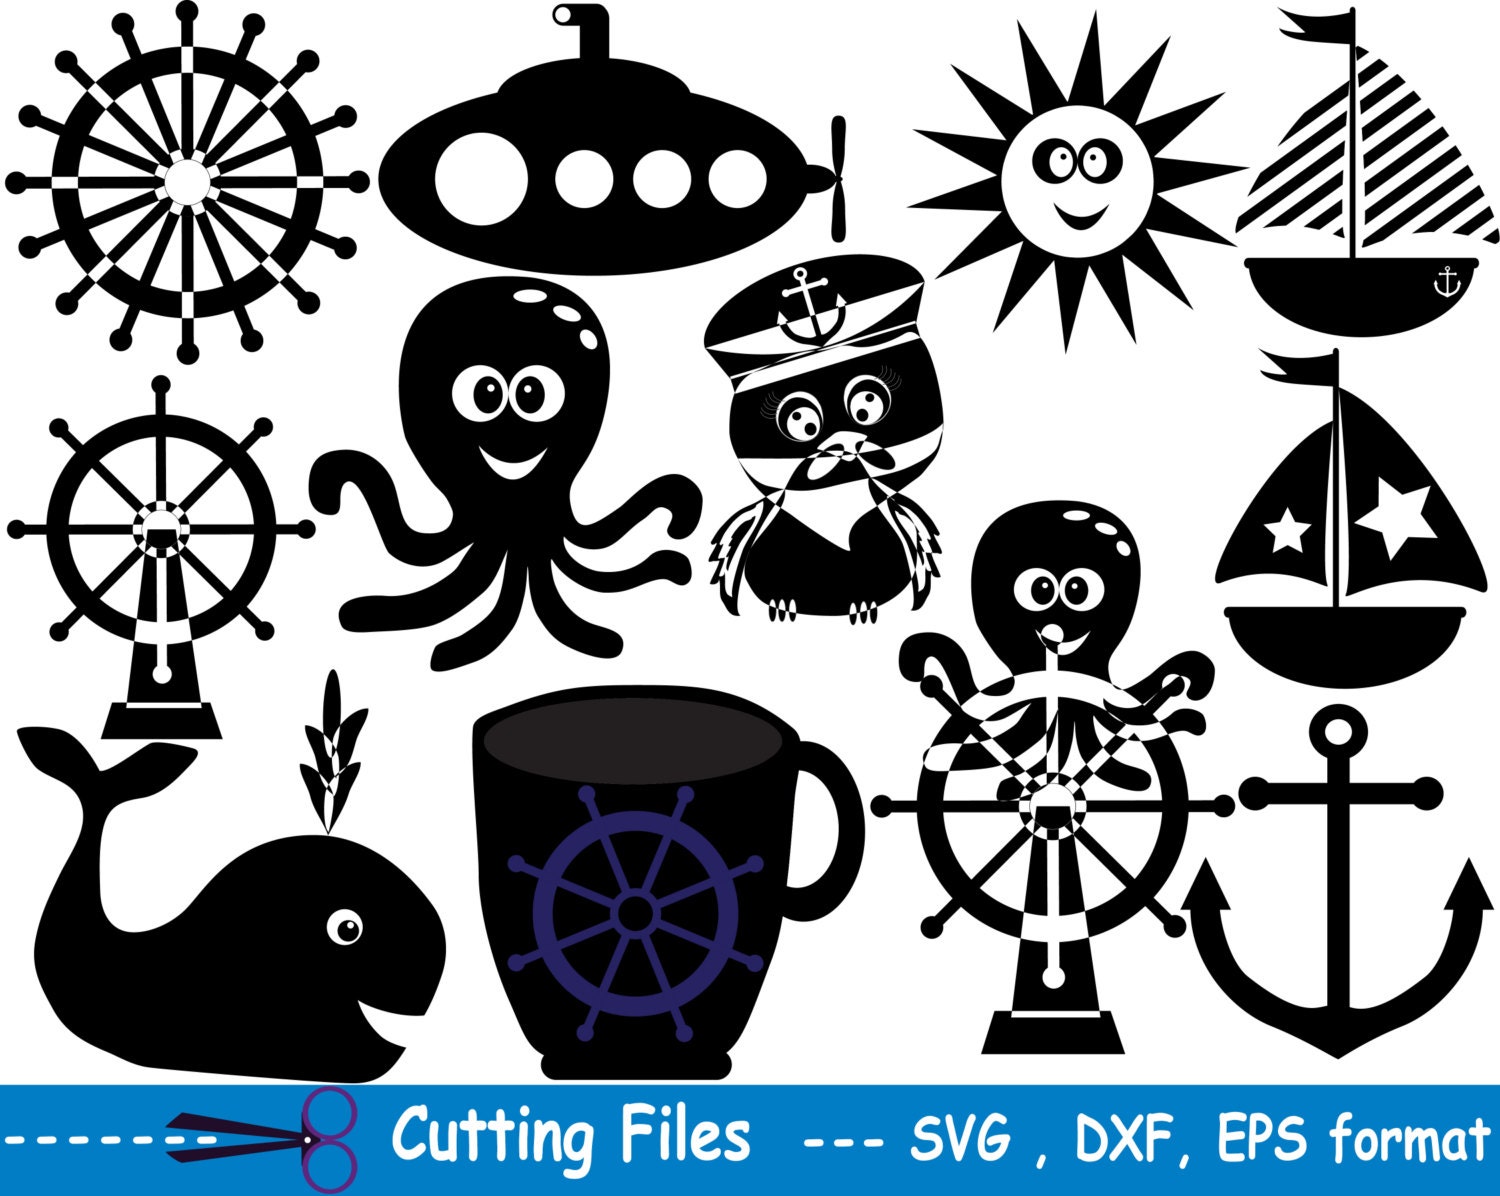 Download Cutting files SVG DXFEPS Nautical Navy Vinyl cut